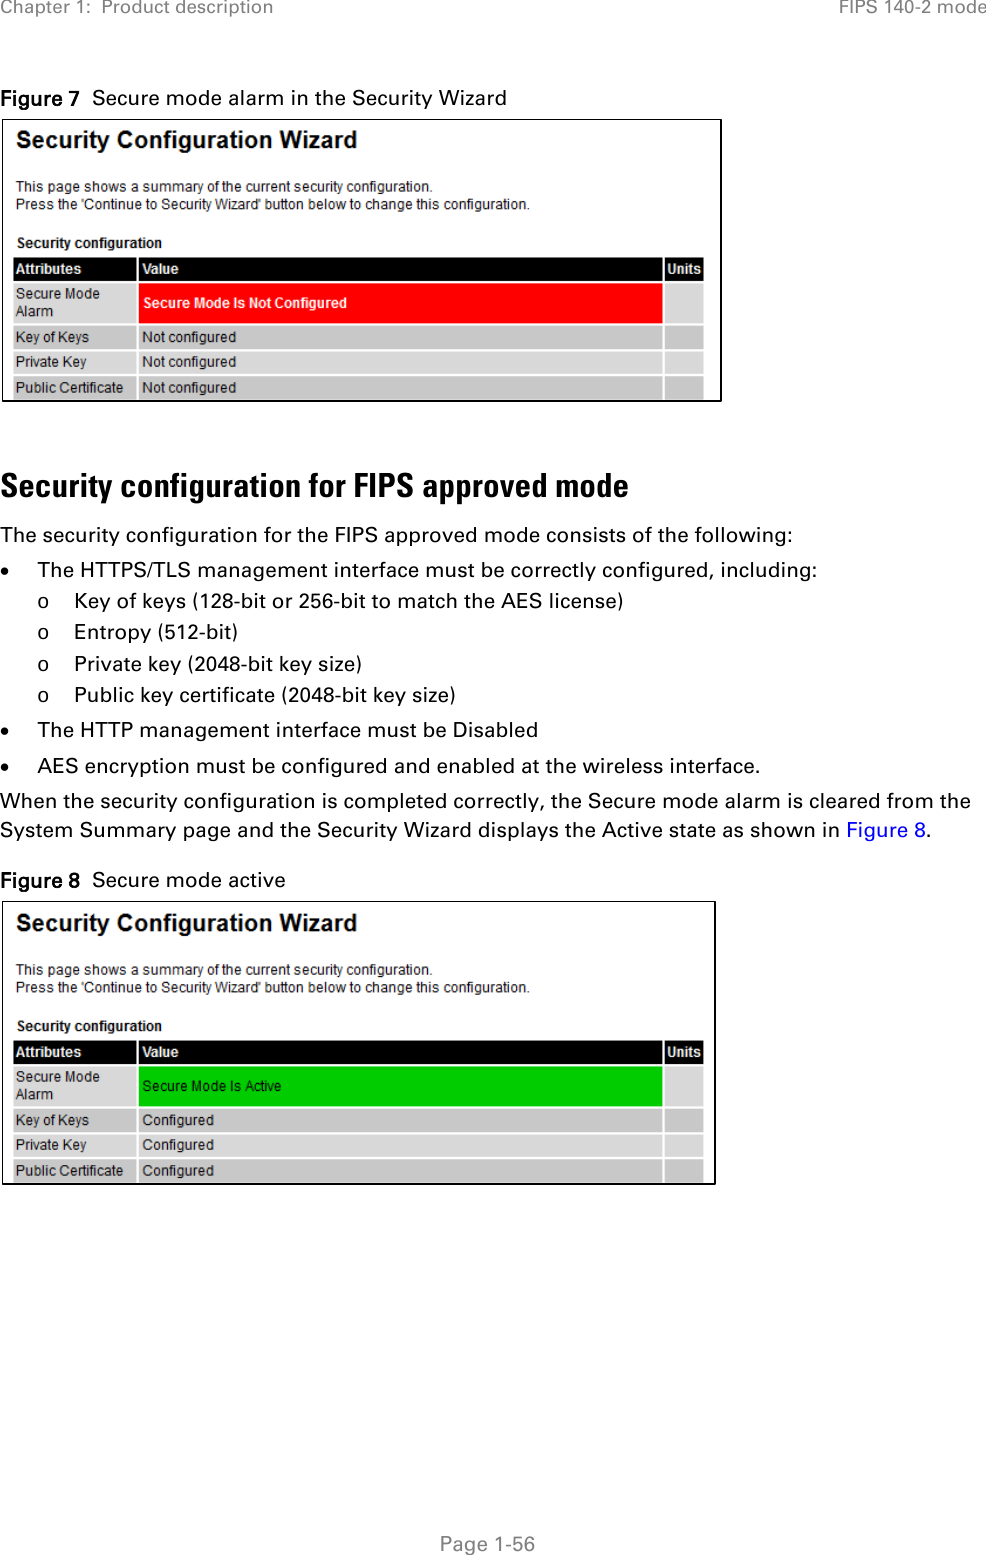 Chapter 1:  Product description FIPS 140-2 mode  Figure 7  Secure mode alarm in the Security Wizard   Security configuration for FIPS approved mode The security configuration for the FIPS approved mode consists of the following: • The HTTPS/TLS management interface must be correctly configured, including: o Key of keys (128-bit or 256-bit to match the AES license) o Entropy (512-bit) o Private key (2048-bit key size) o Public key certificate (2048-bit key size) • The HTTP management interface must be Disabled • AES encryption must be configured and enabled at the wireless interface. When the security configuration is completed correctly, the Secure mode alarm is cleared from the System Summary page and the Security Wizard displays the Active state as shown in Figure 8. Figure 8  Secure mode active       Page 1-56 